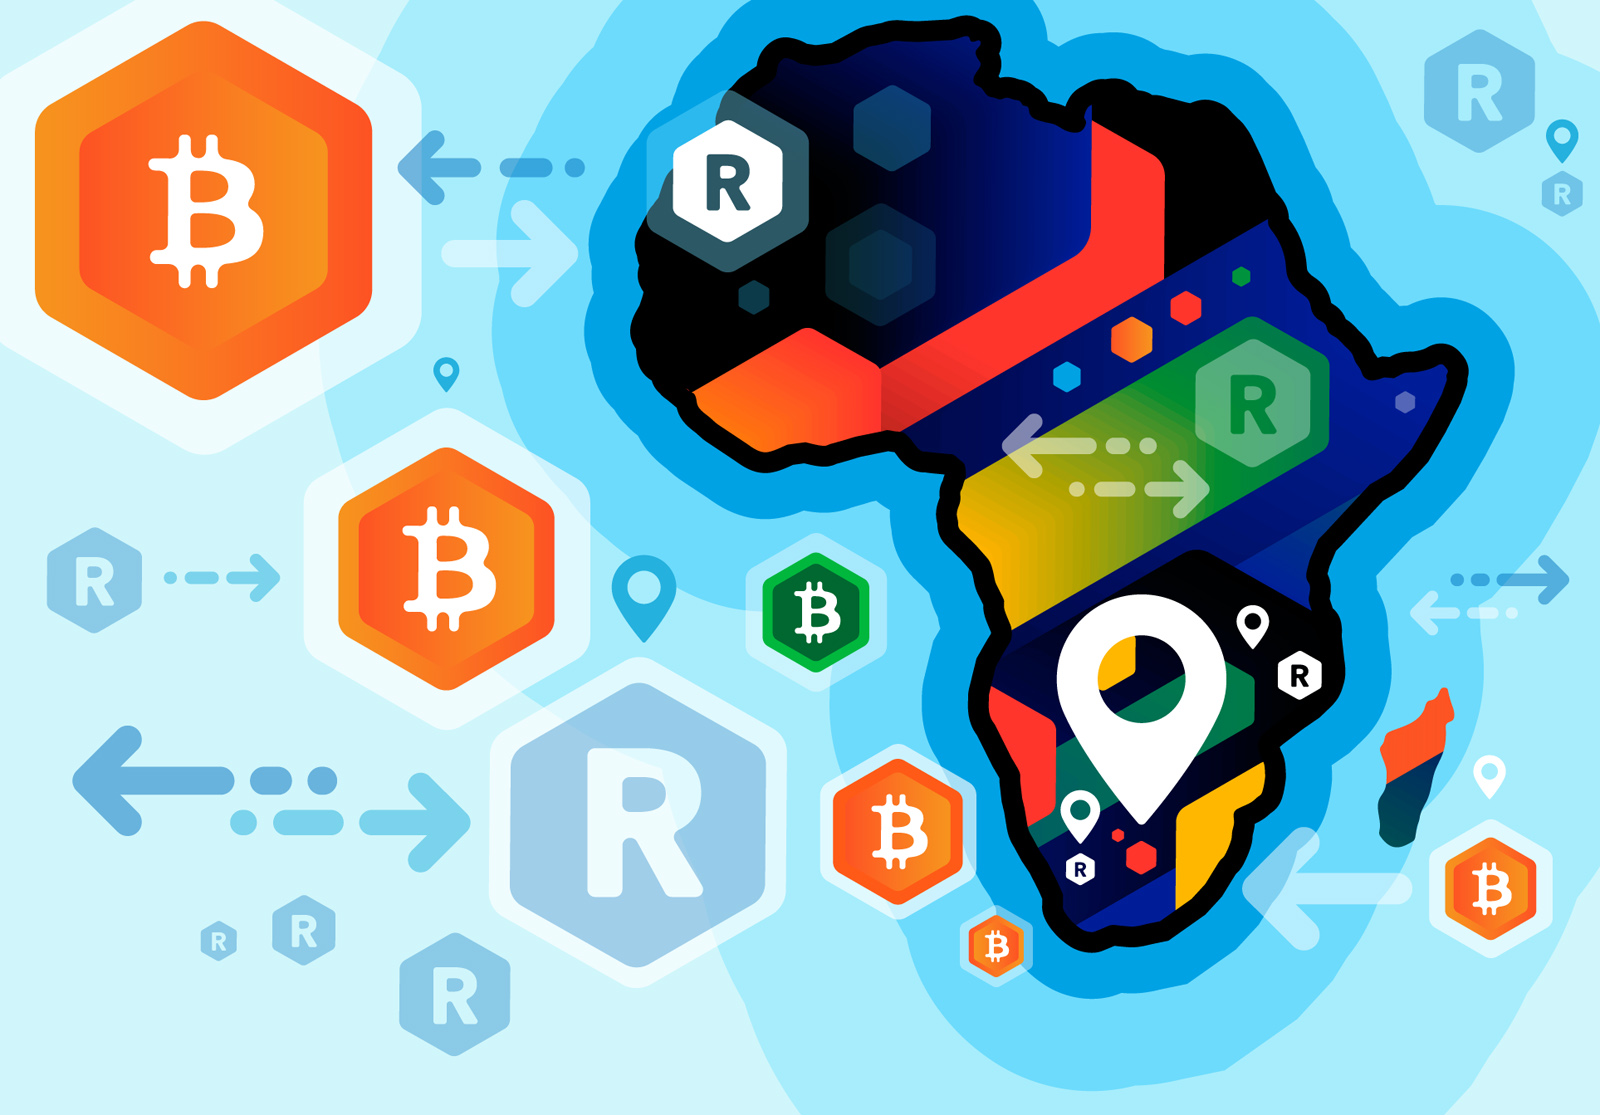 buy bitcoins south africa